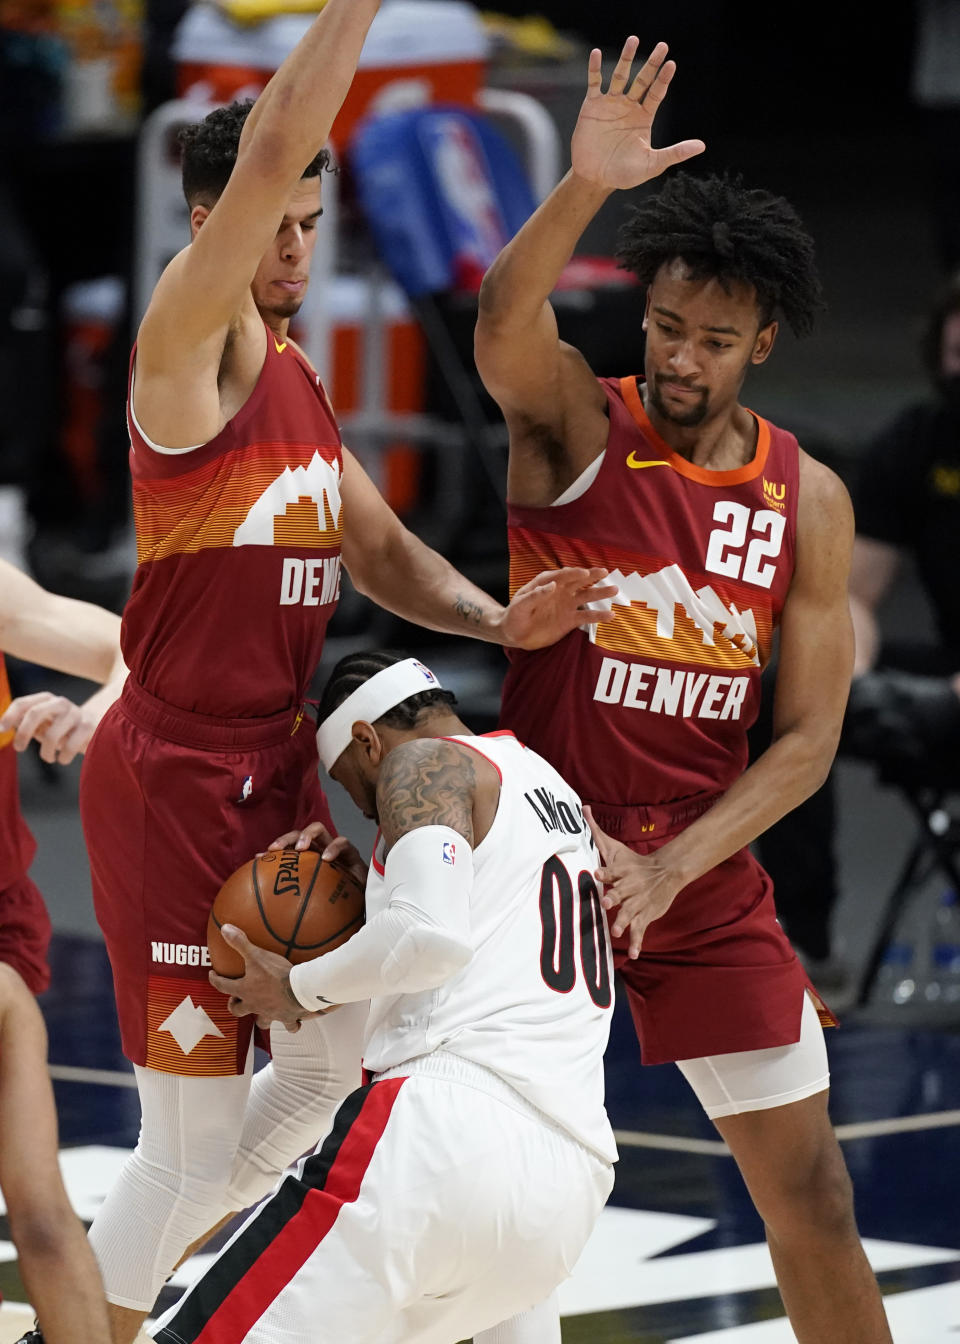 Portland Trail Blazers forward Carmelo Anthony, center, is fouled as he drives the lane as Denver Nuggets forwards Michael Porter Jr., back left, and Zeke Nnaji defend in the first half of an NBA basketball game on Tuesday, Feb. 23, 2021, in Denver. (AP Photo/David Zalubowski)